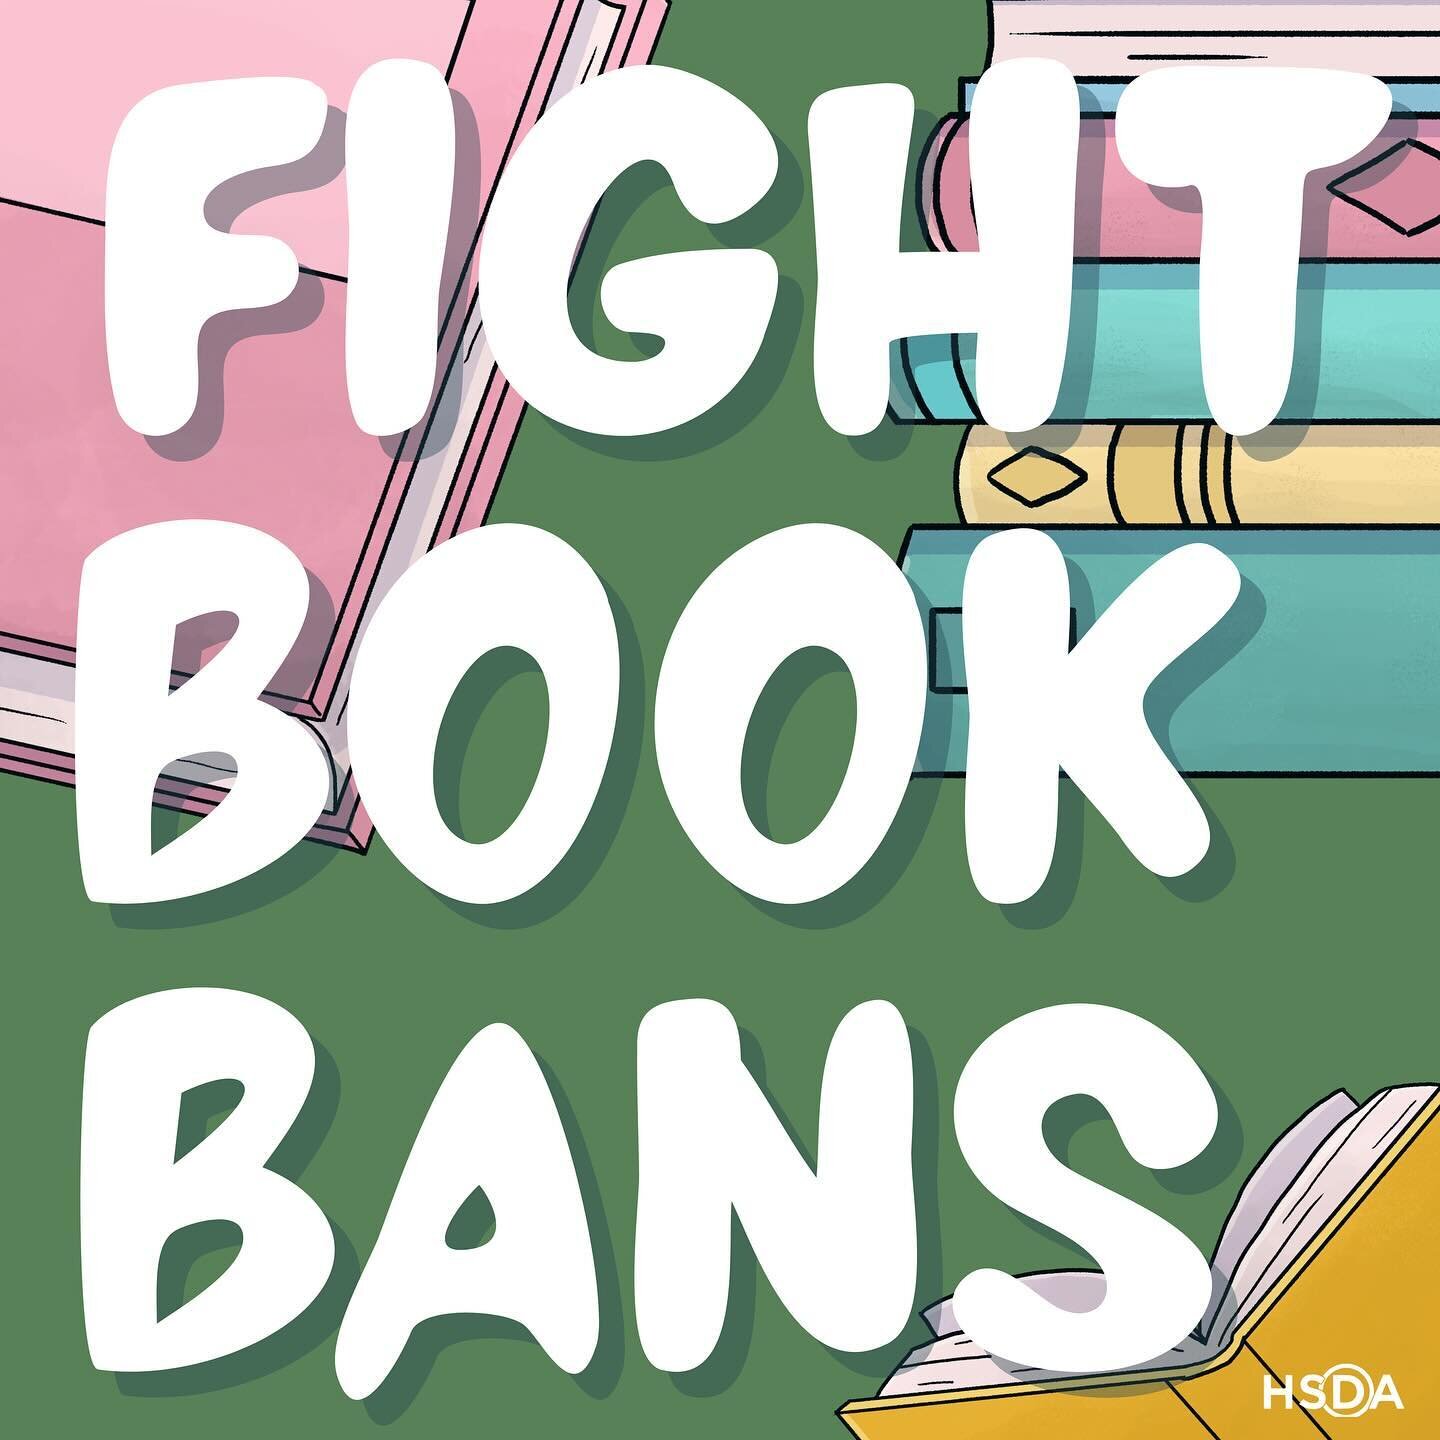 Join HSDA and our partners across the nation, including the first Gen-Z member of Congress, Rep. Frost, to fight book bans! Register NOW via the link in bio 🔗 #HSDA #BookBans